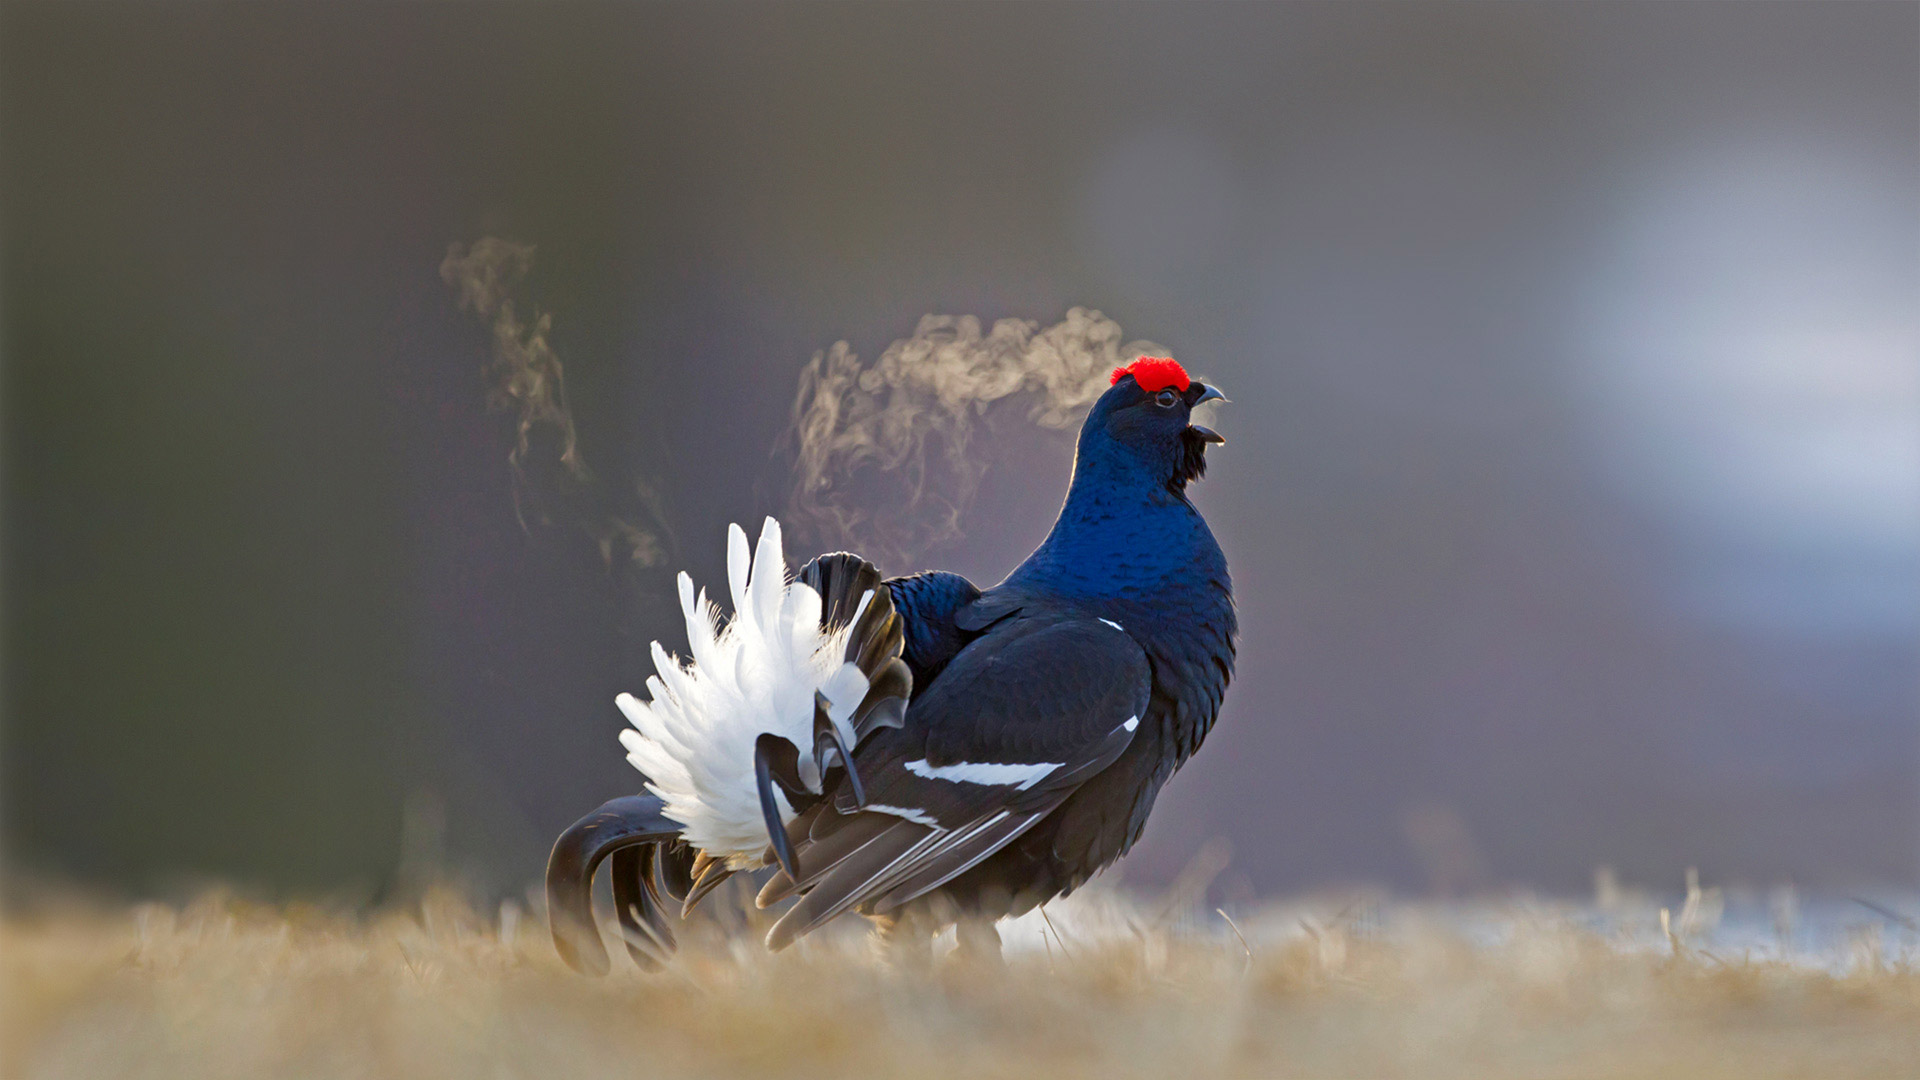 Black grouse male calling at a lek site in Kuusamo, Finland - Oliver Smart/Alamy)